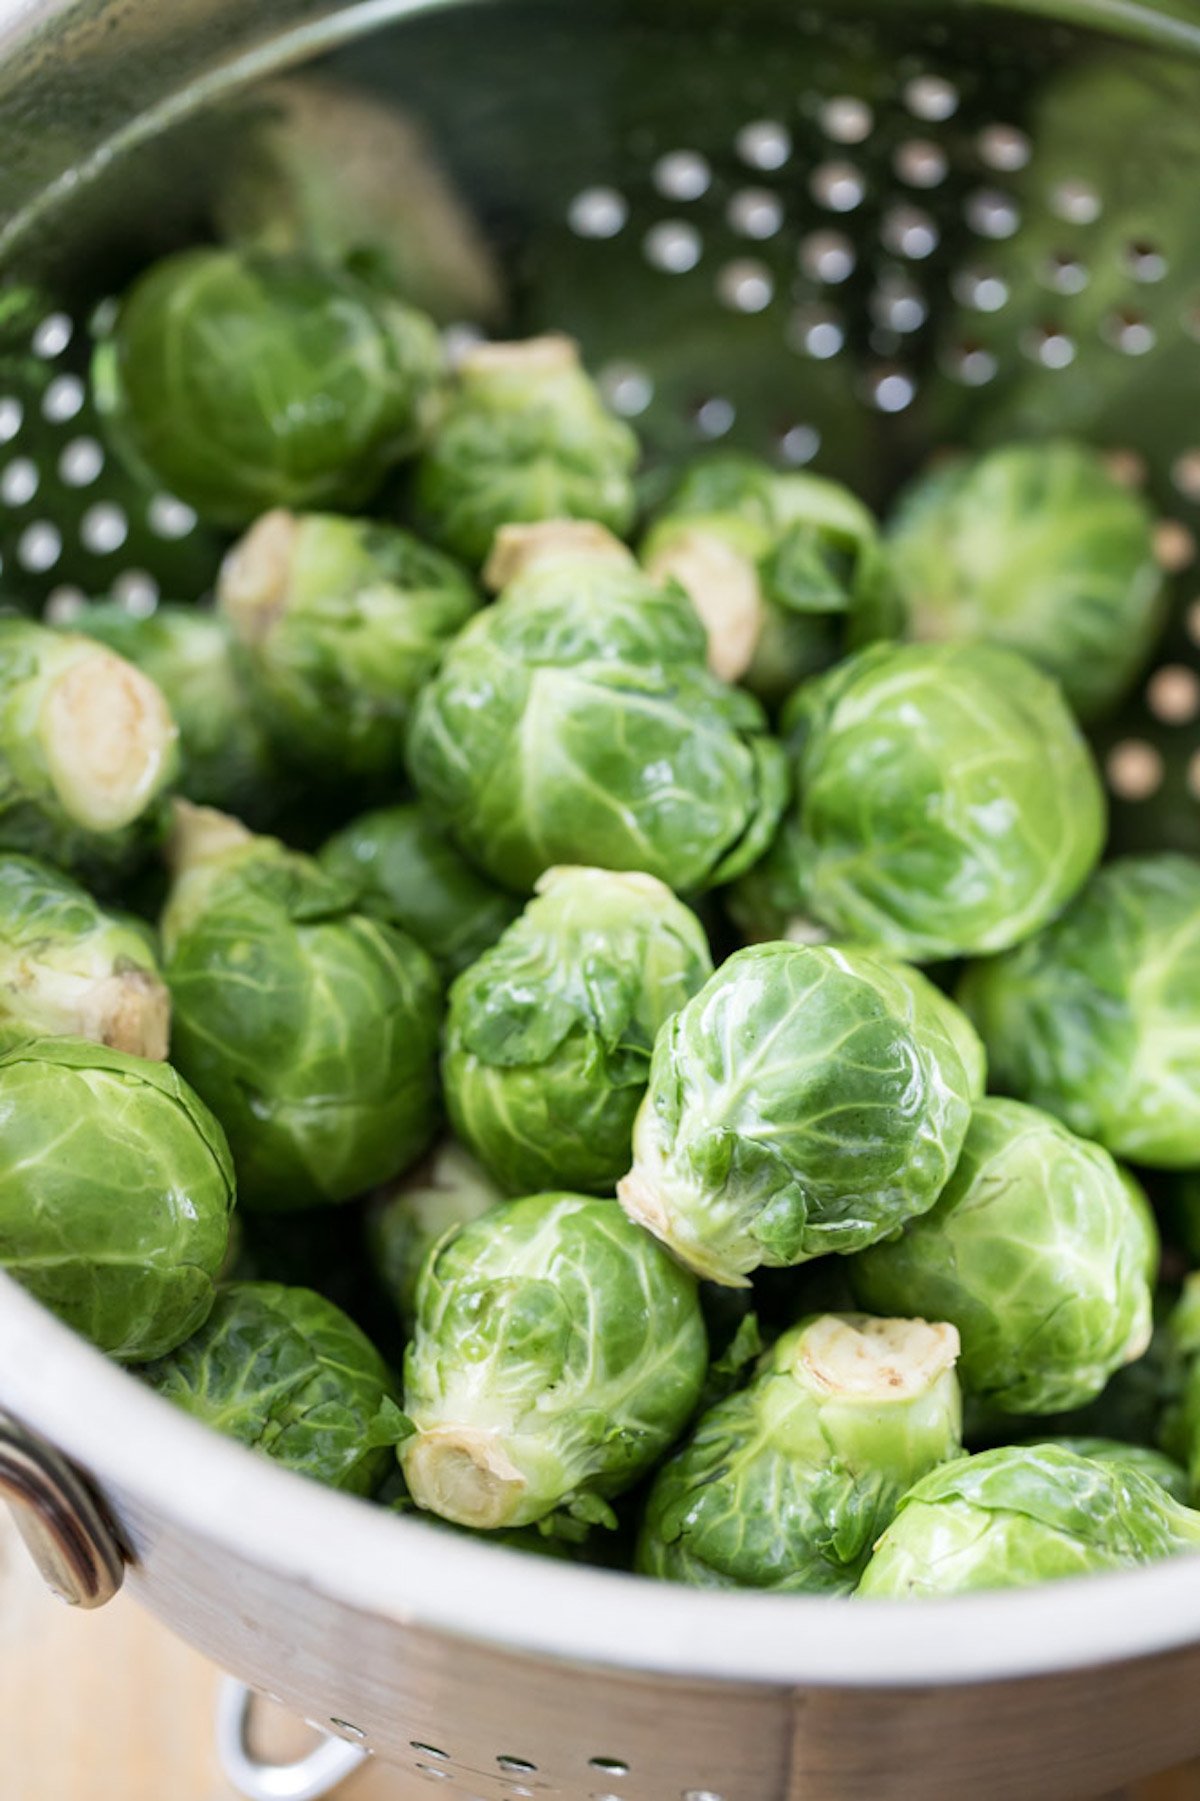 Whole brussels sprouts in a colander.